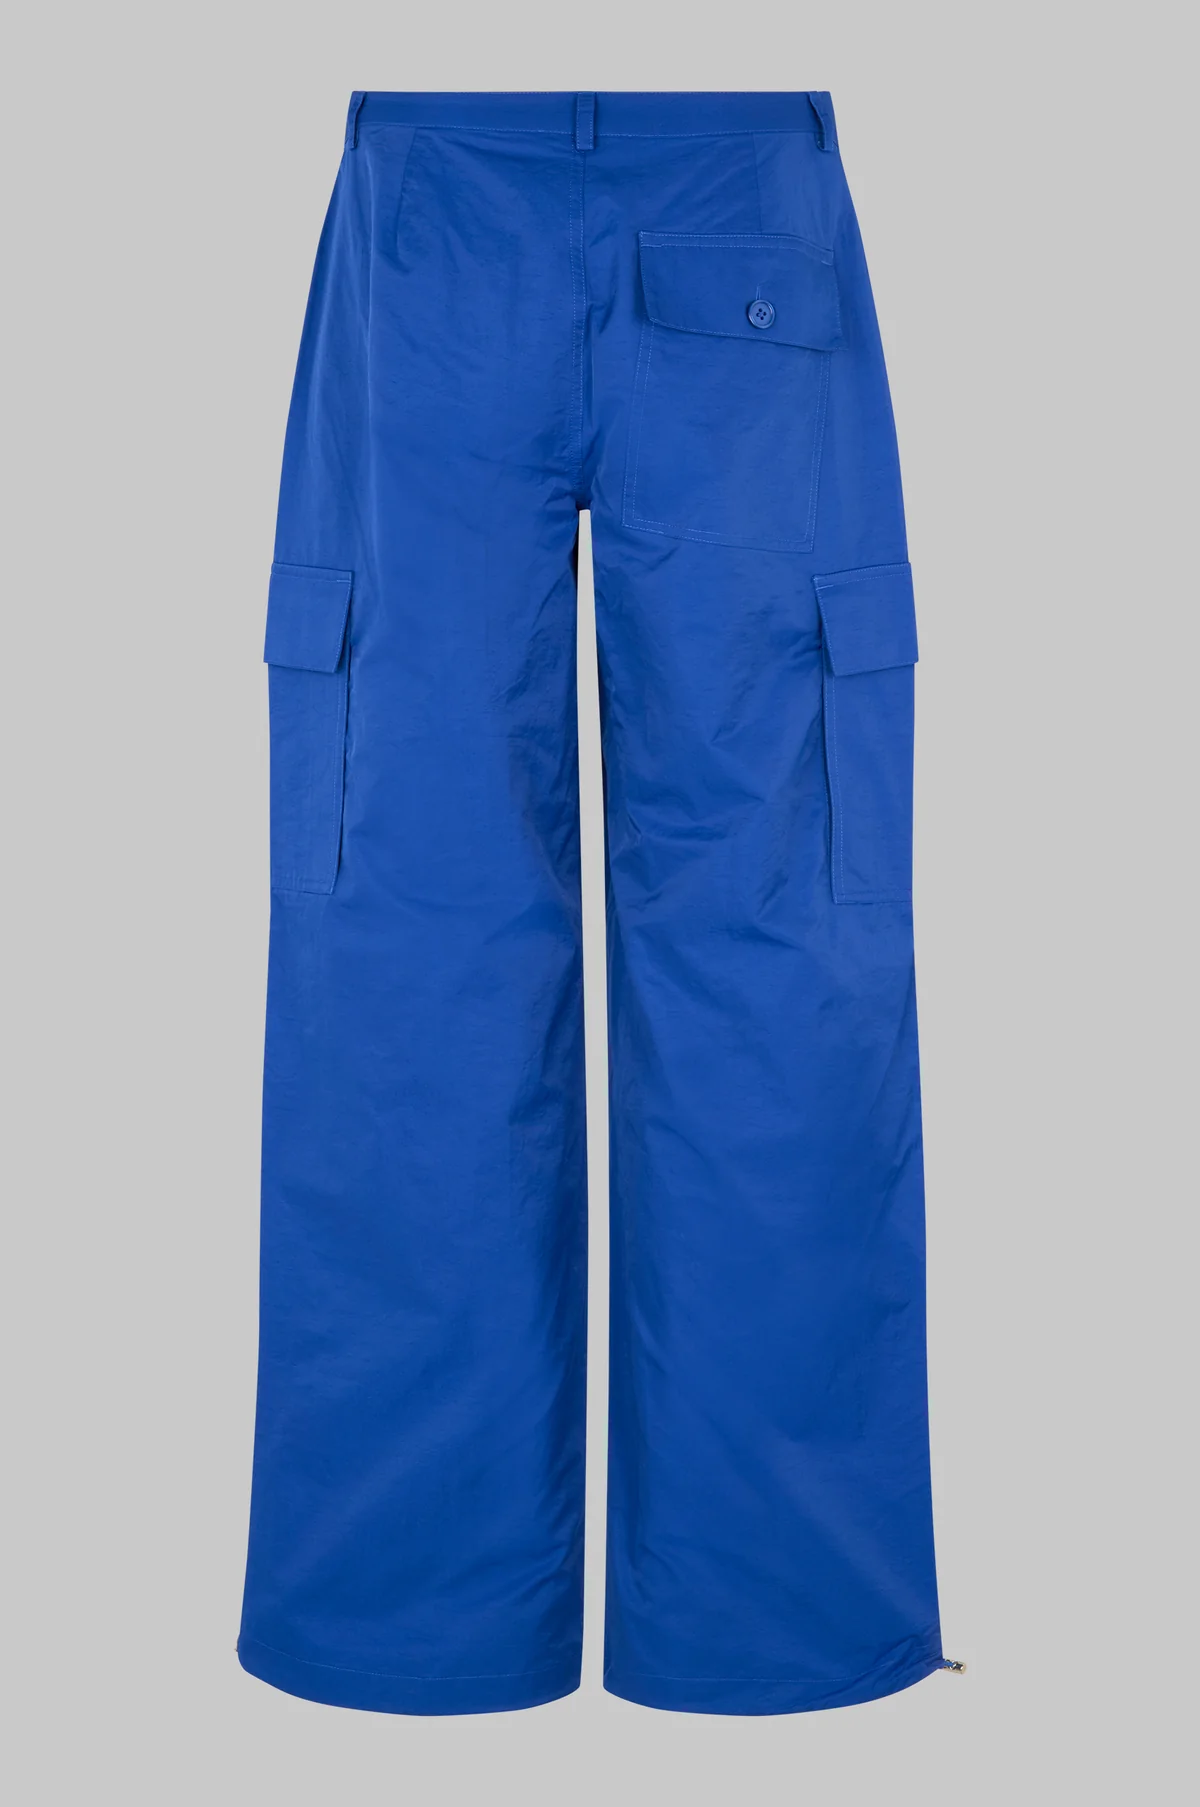 OVAL SQUARE Os work pants